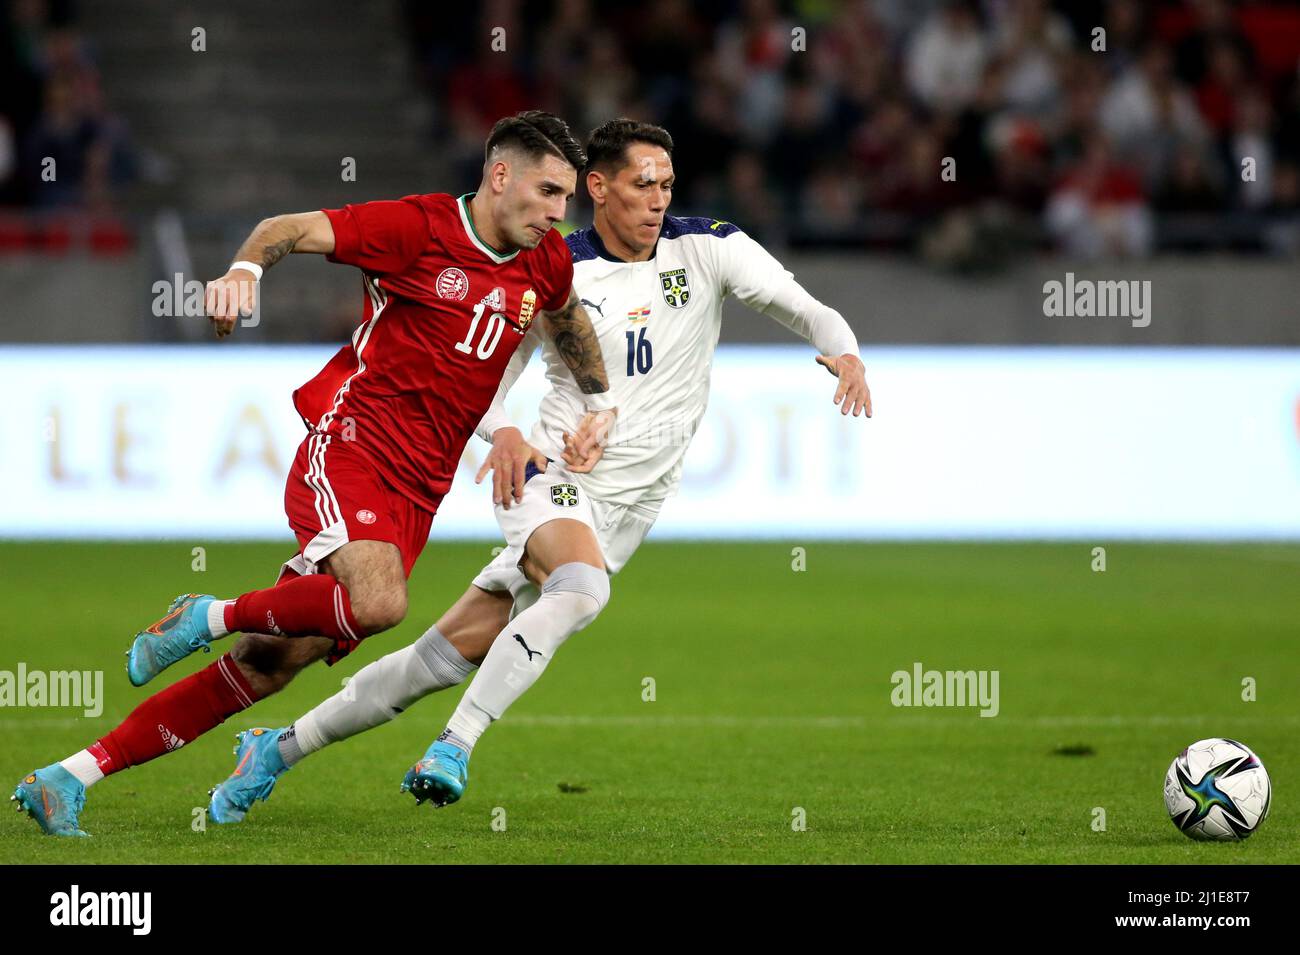 BUDAPEST, HUNGARY - MARCH 24: Dominik Szoboszlai of Hungary competes for the ball with Sasa Lukic of Serbia ,during the international friendly match between Hungary and Serbia at Puskas Arena on March 24, 2022 in Budapest, Hungary. (Photo by MB Media) Stock Photo